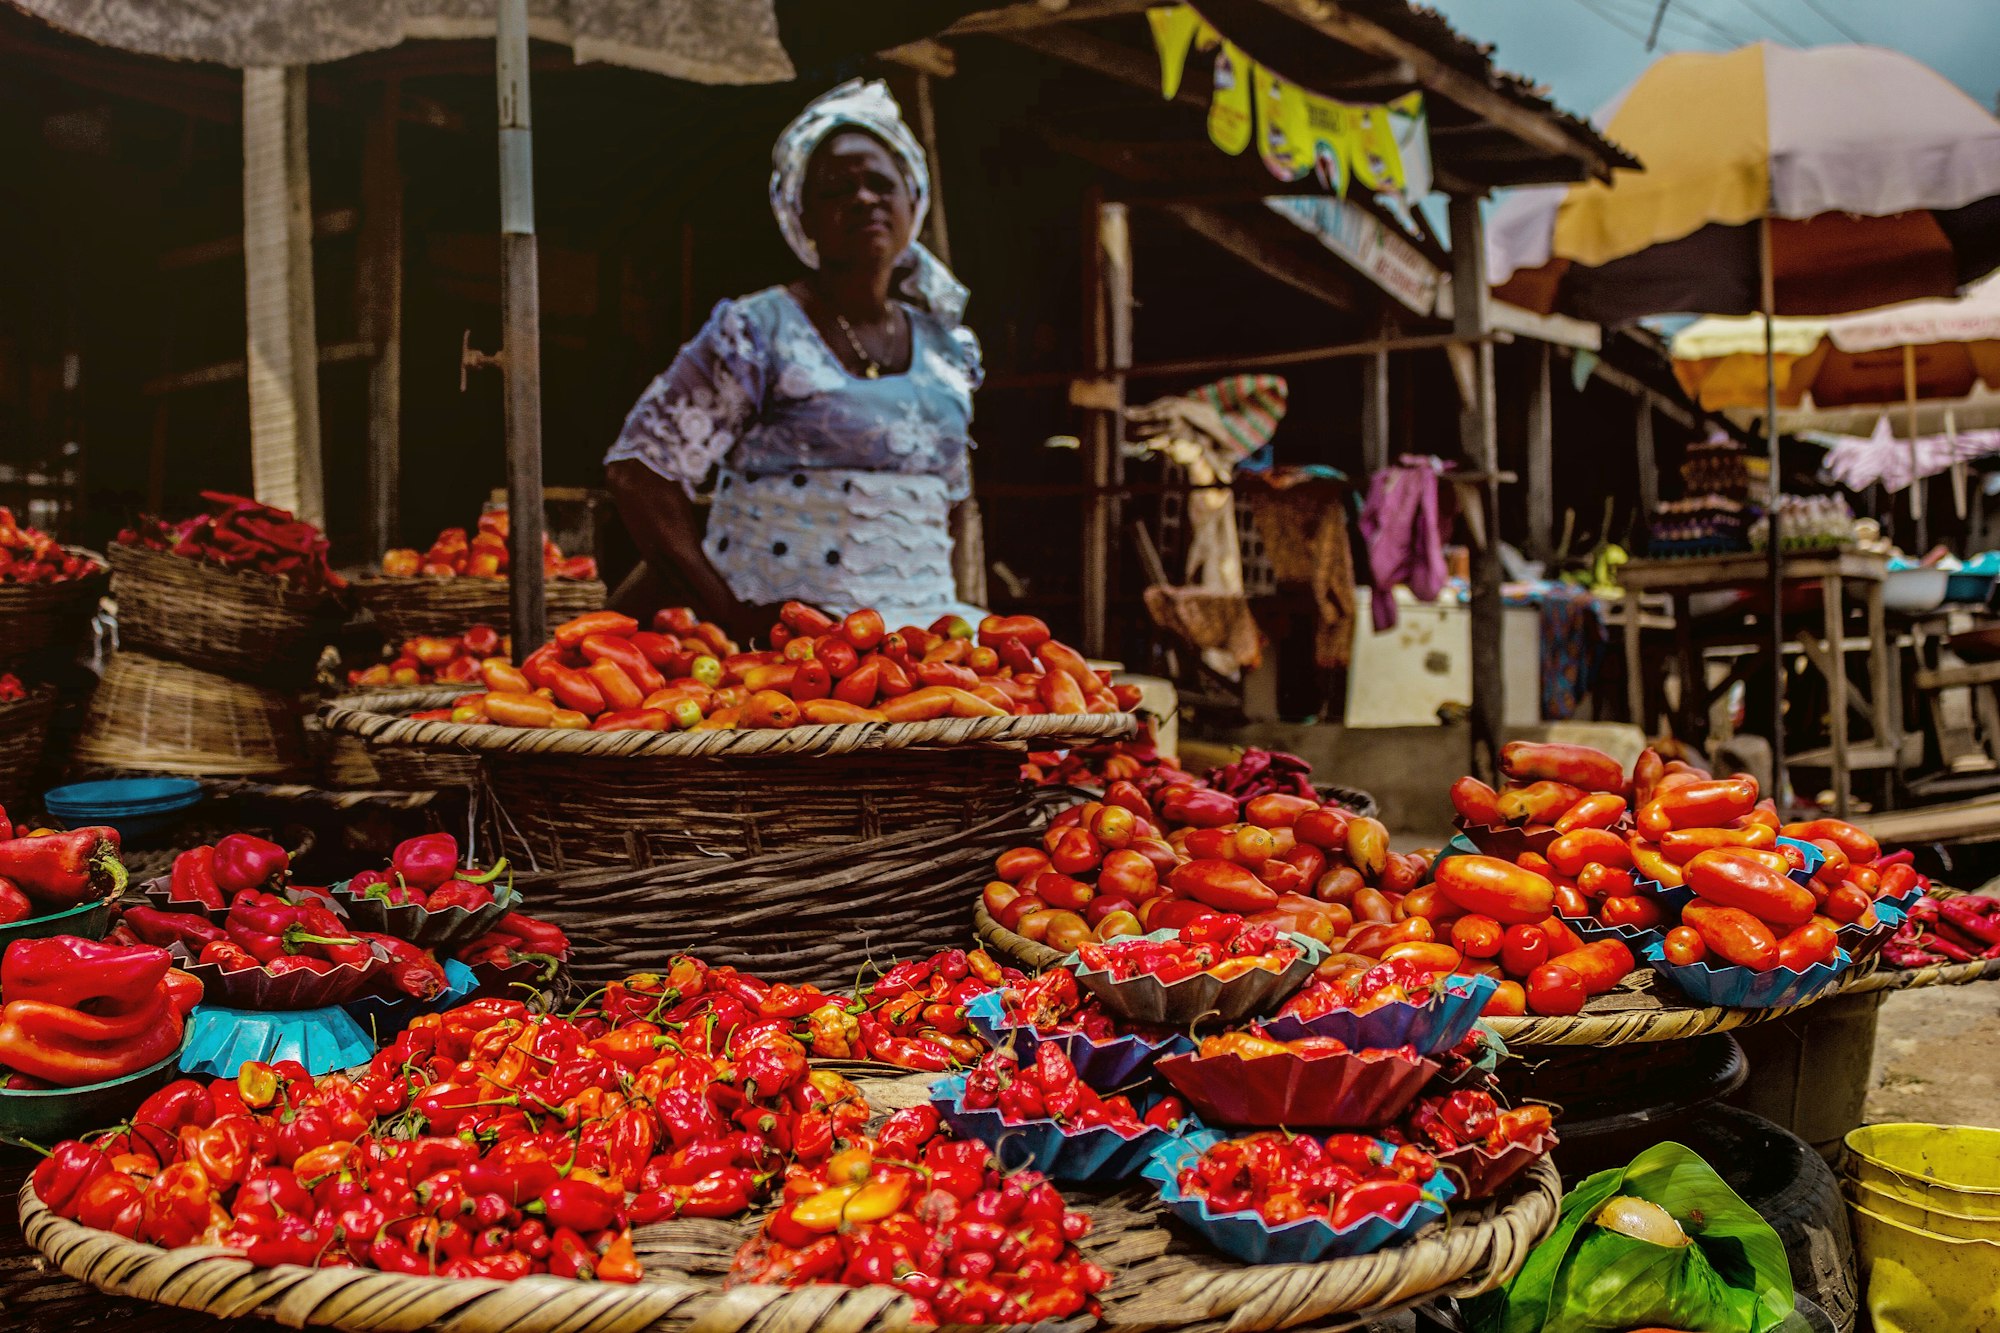 Woman selling pepper sits over her wares in a market.